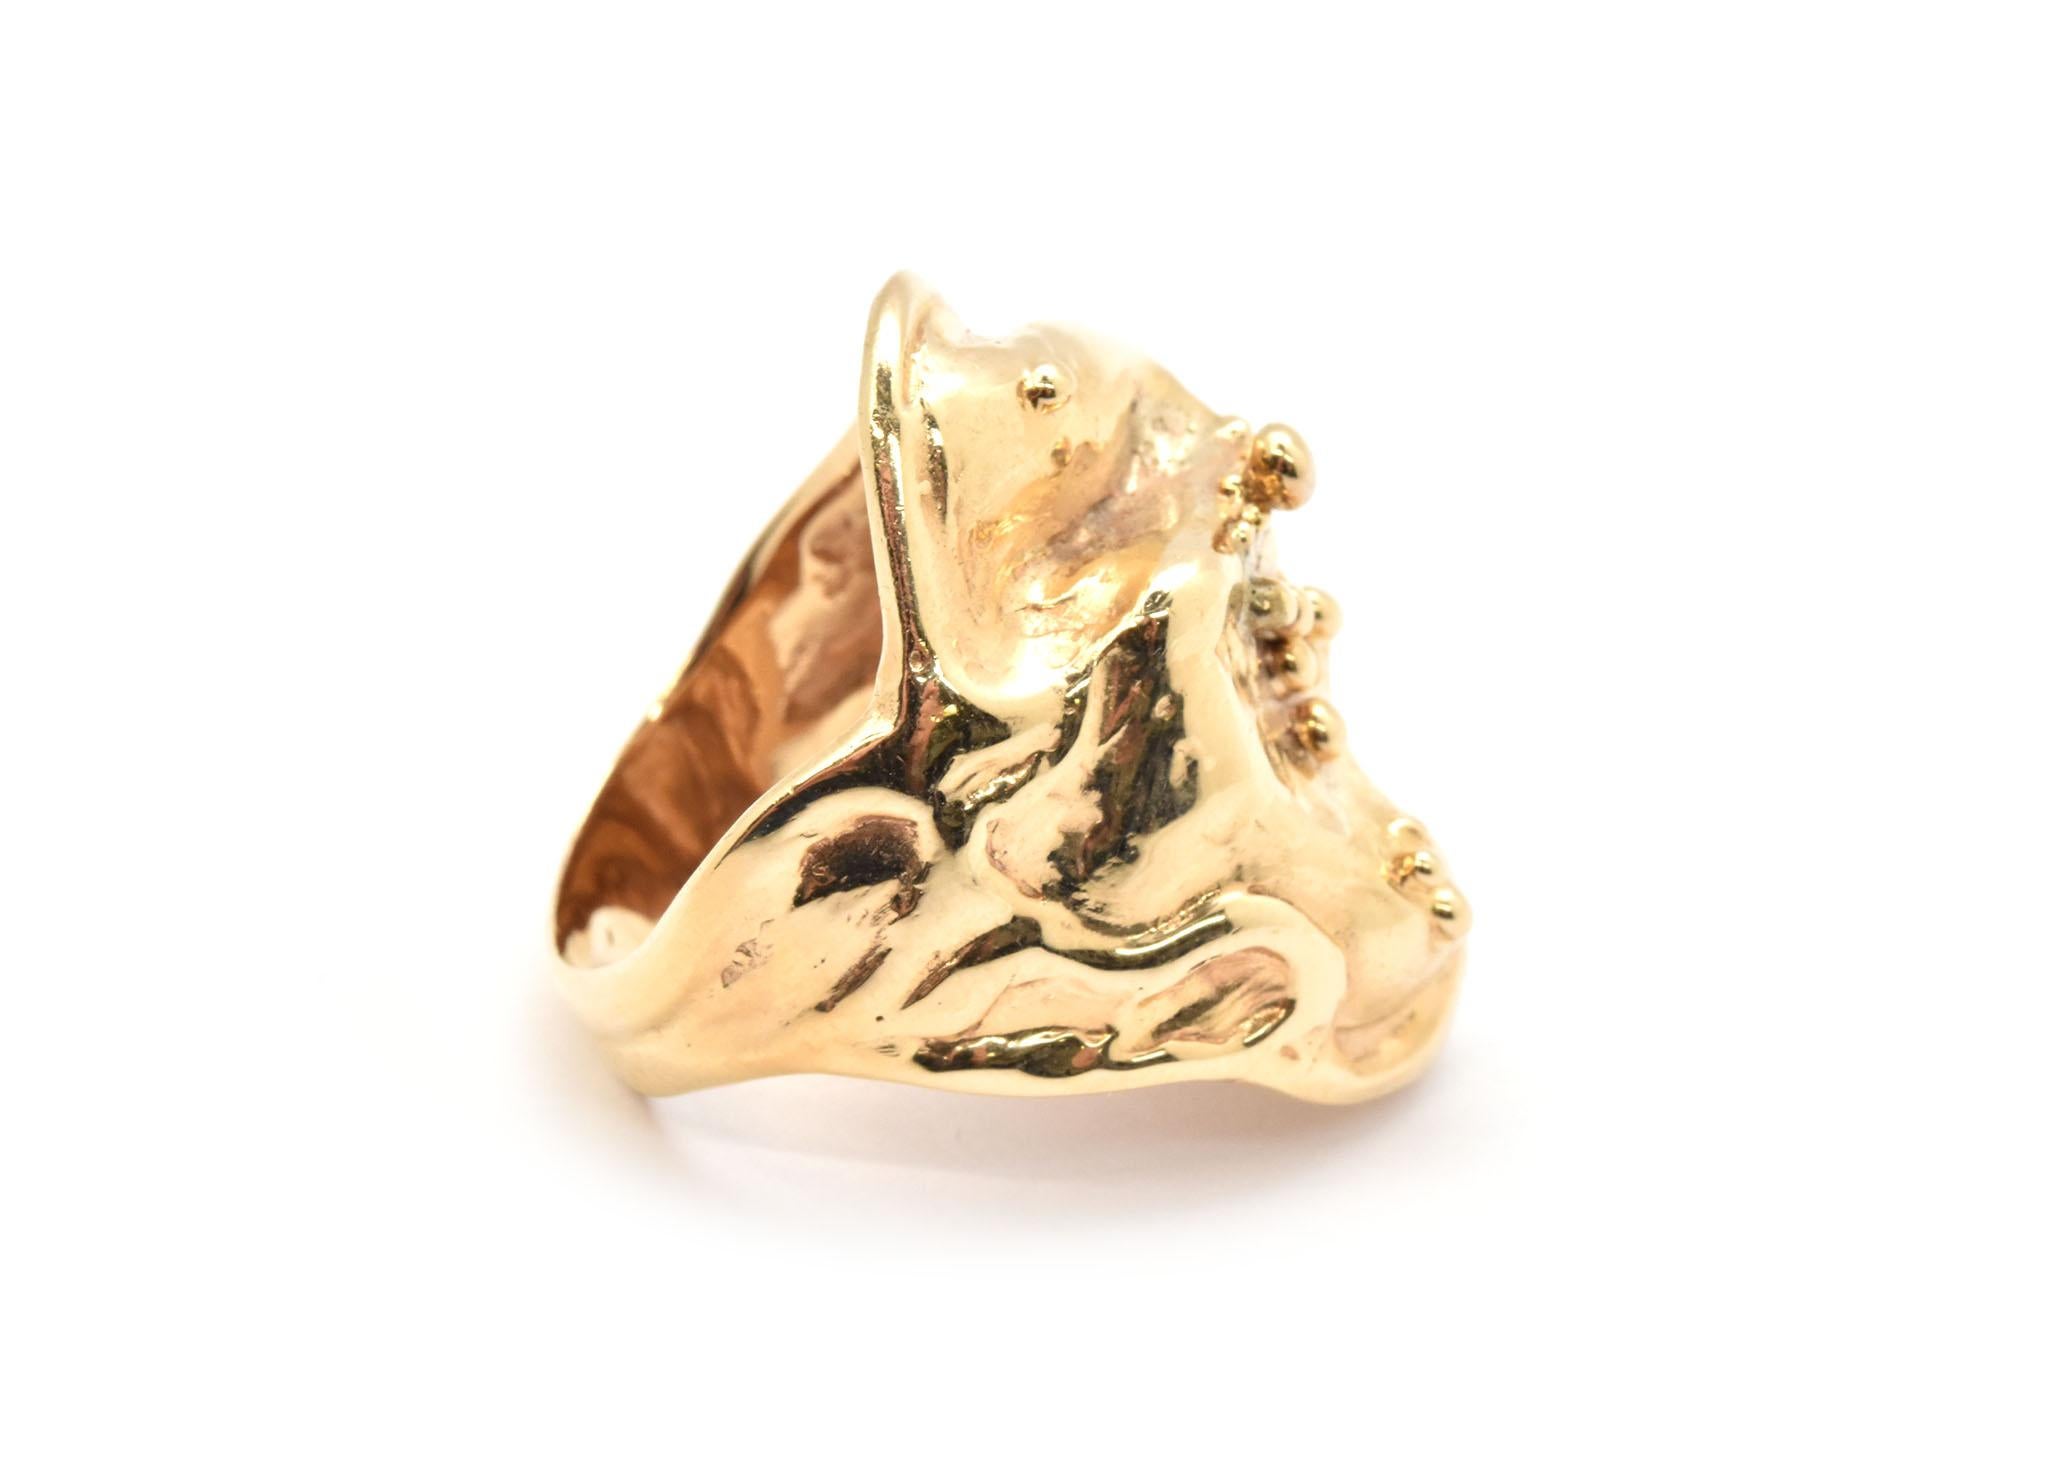 This great chunky funky free-form custom-made ring is made in solid 14k yellow gold. The face of the ring measures 31mm wide and appears to have bubbles. The piece weighs 10.85 grams and is a size 10.